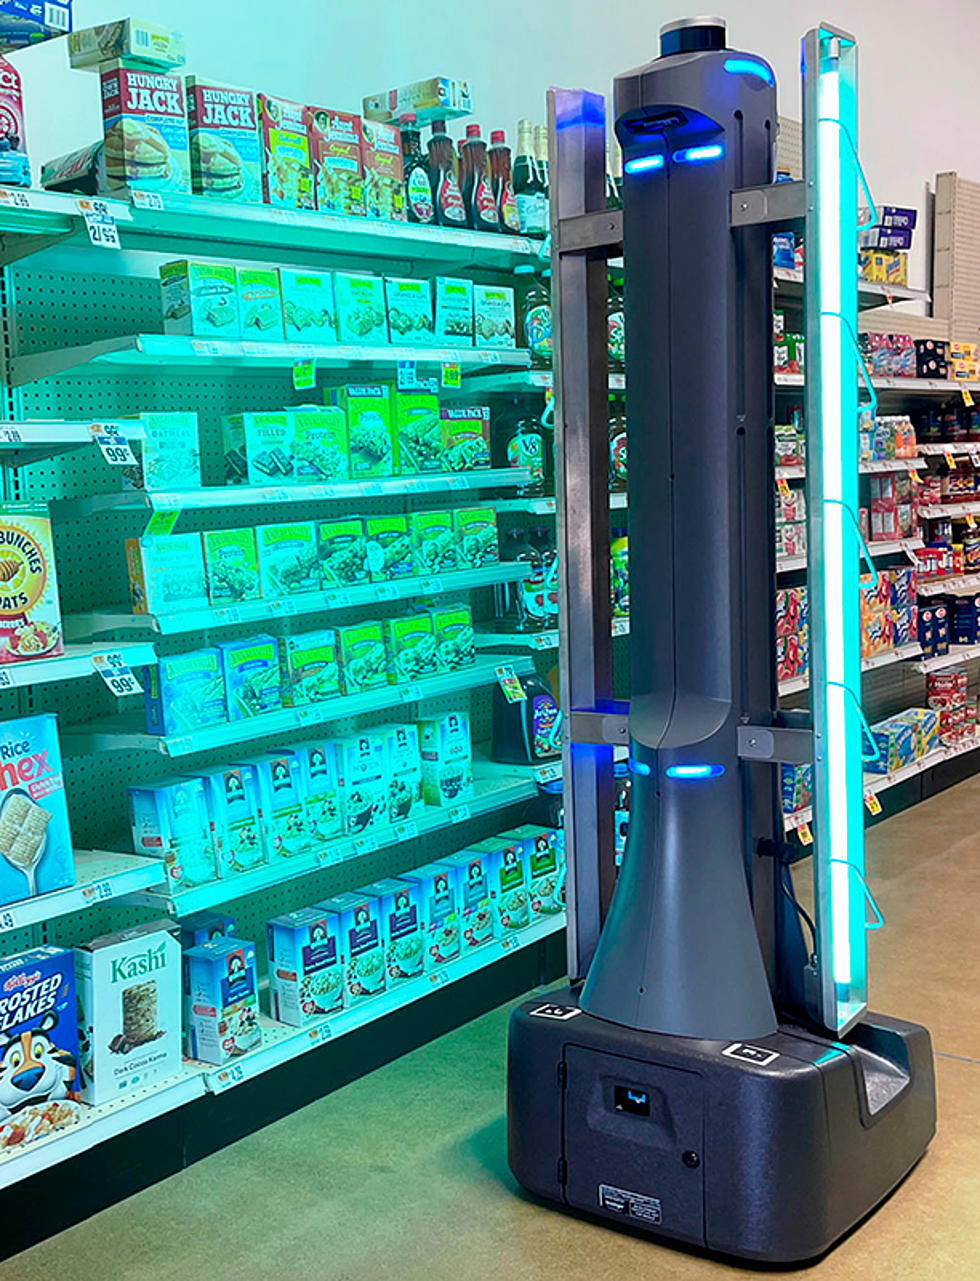 Illinois Grocery Store Deploys a Robot to Improve Customer Experience